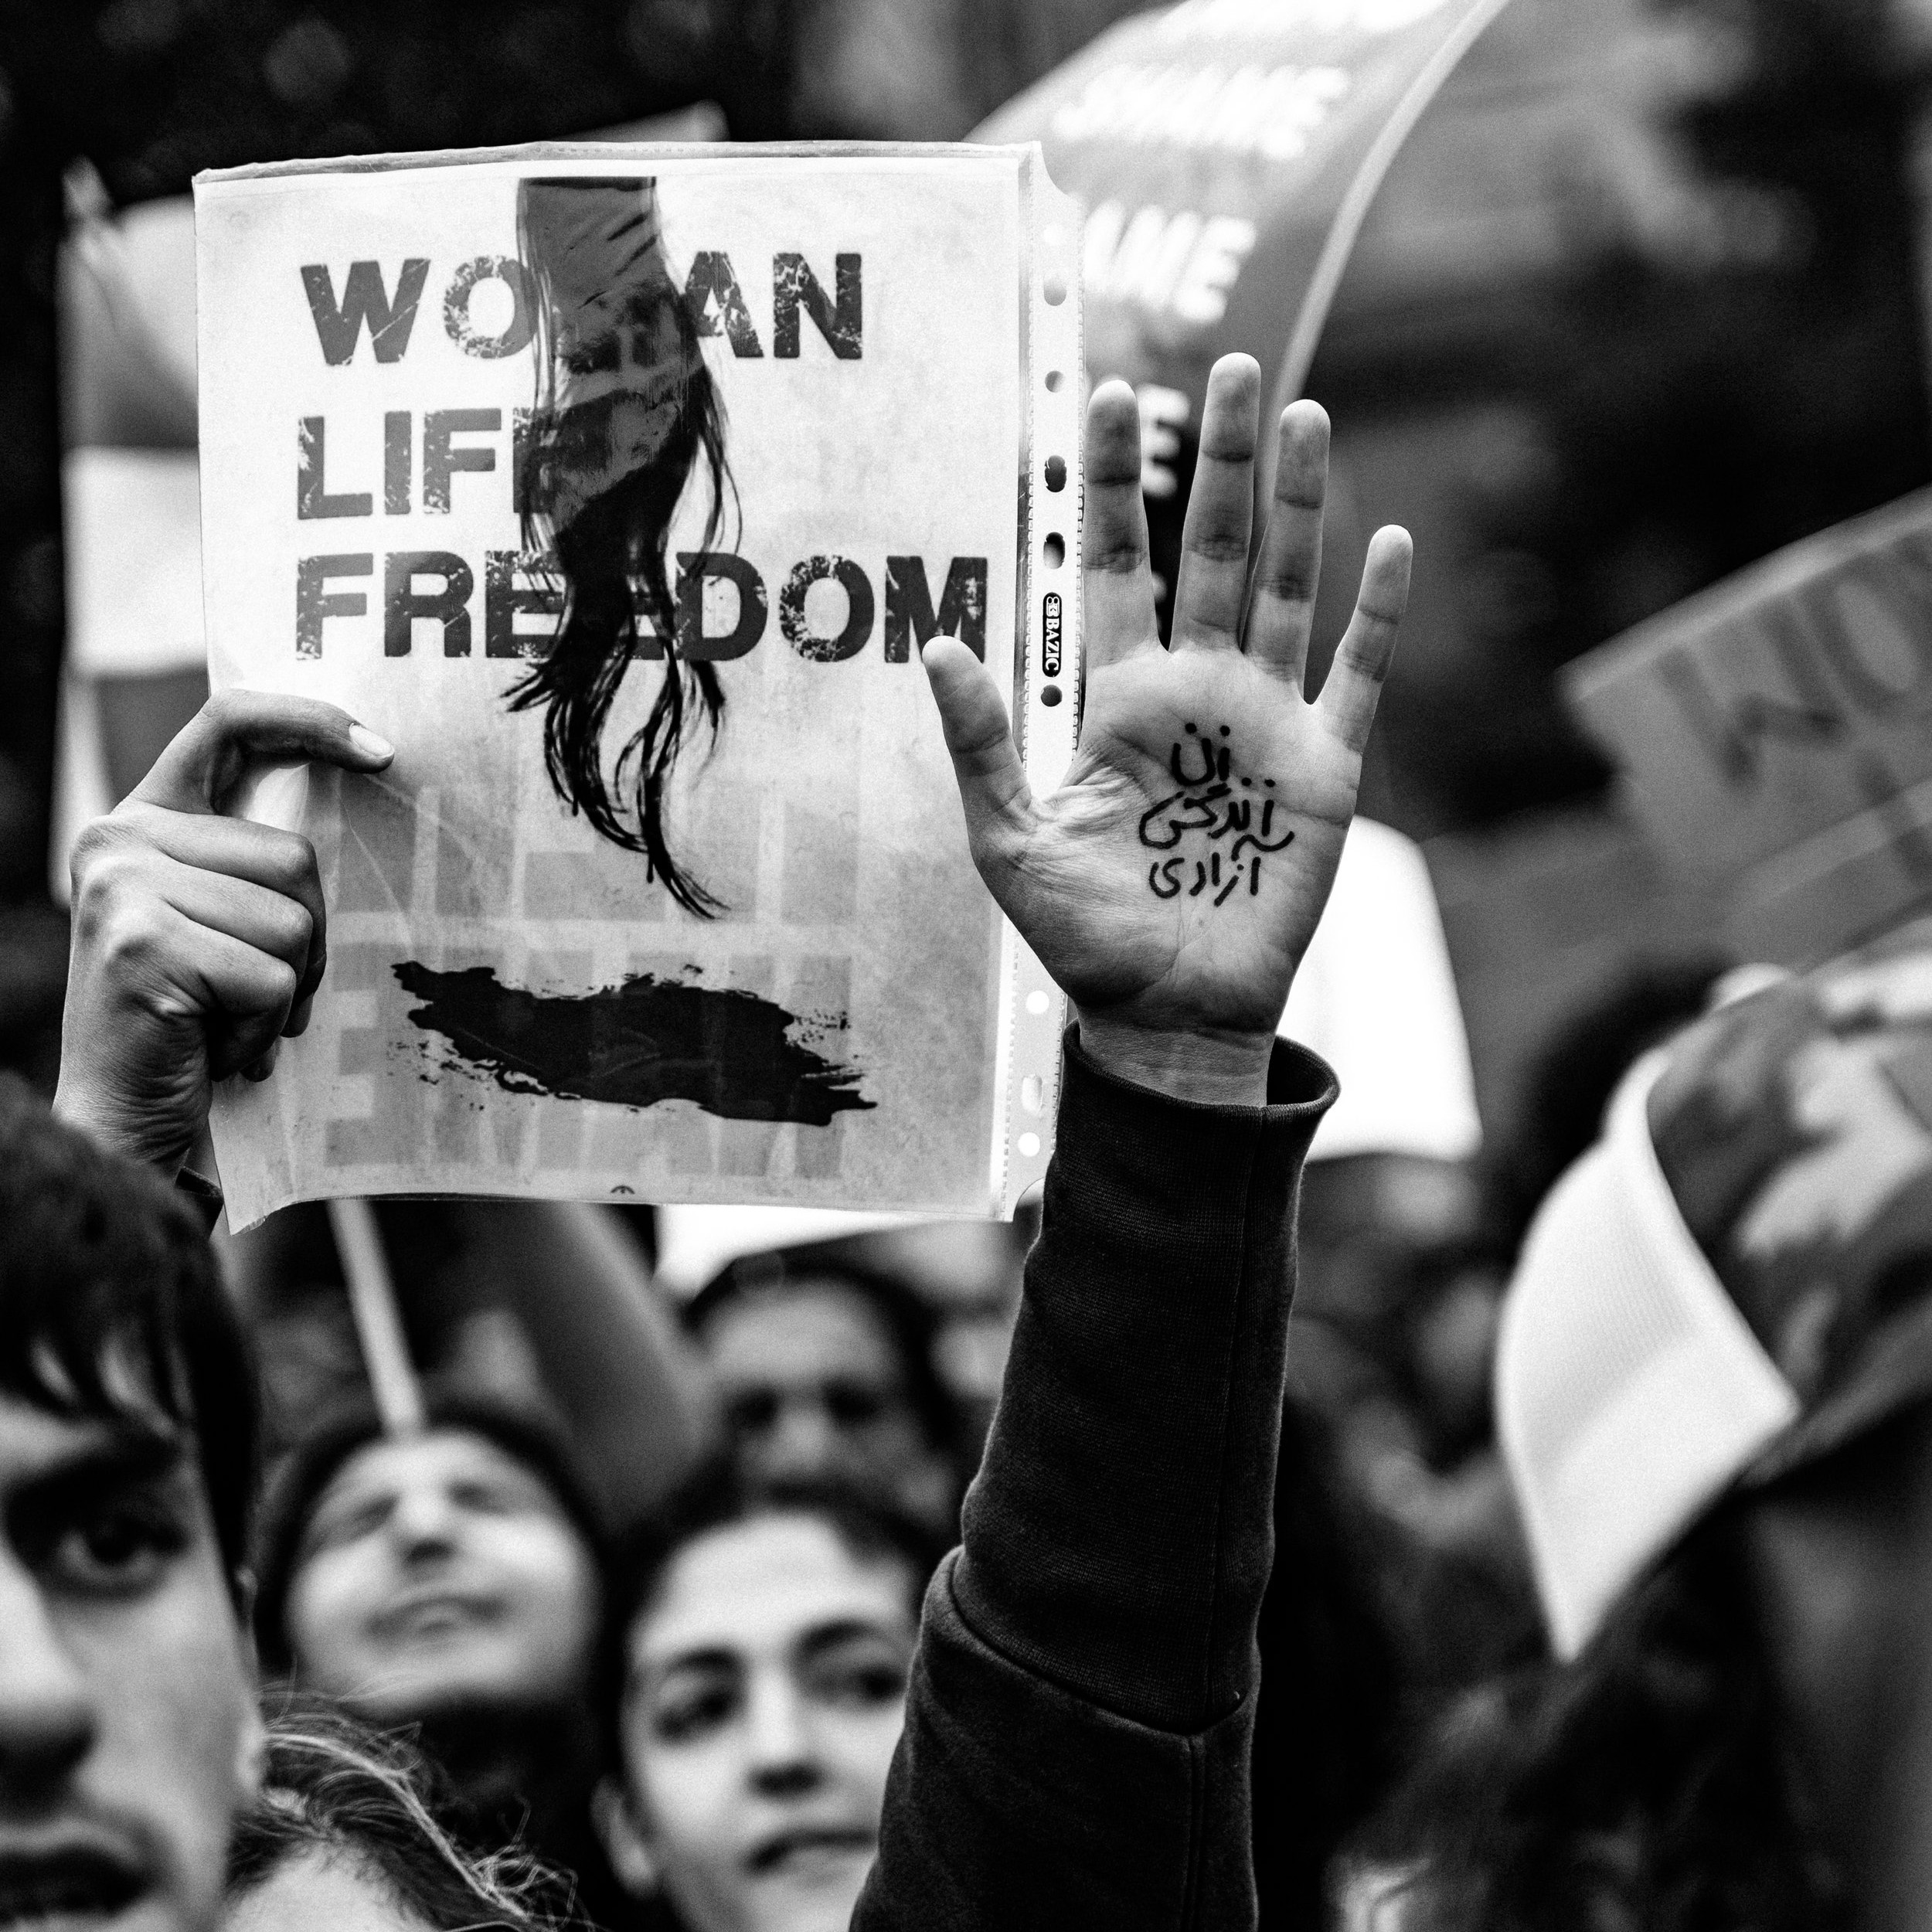 a black and white photograph by Chidi Nobi depicting a protest, one protestor has their hand raised with Sanskrit on their palm, another holds up a sign that reads women, life, freedom